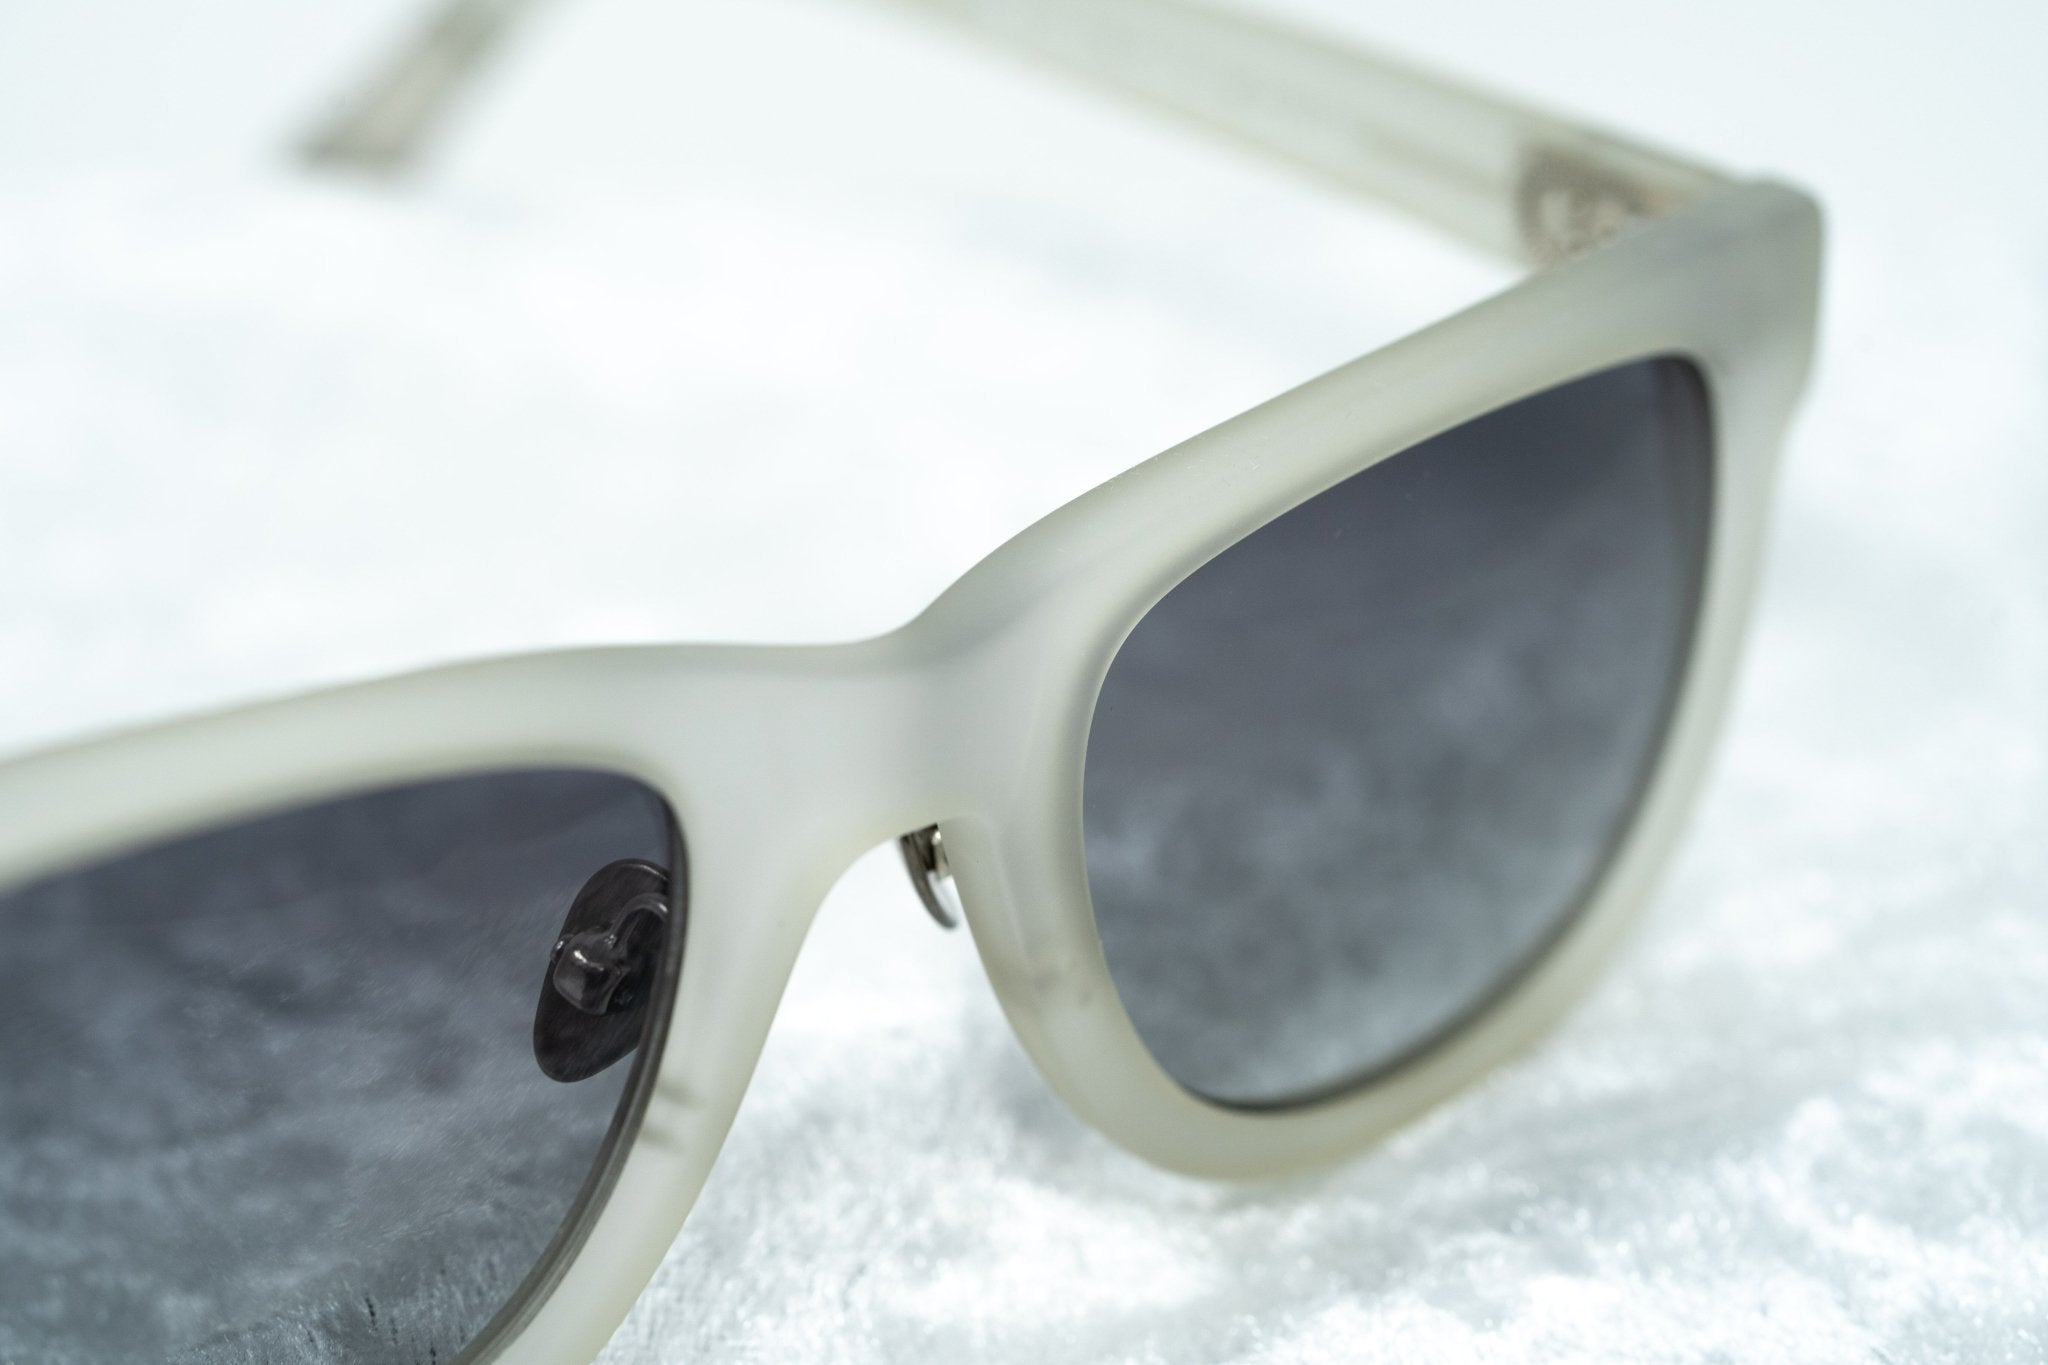 Kris Van Assche Sunglasses with D-frame Rubberised Clear and Grey Lenses - KVA47C2SUN - Watches & Crystals